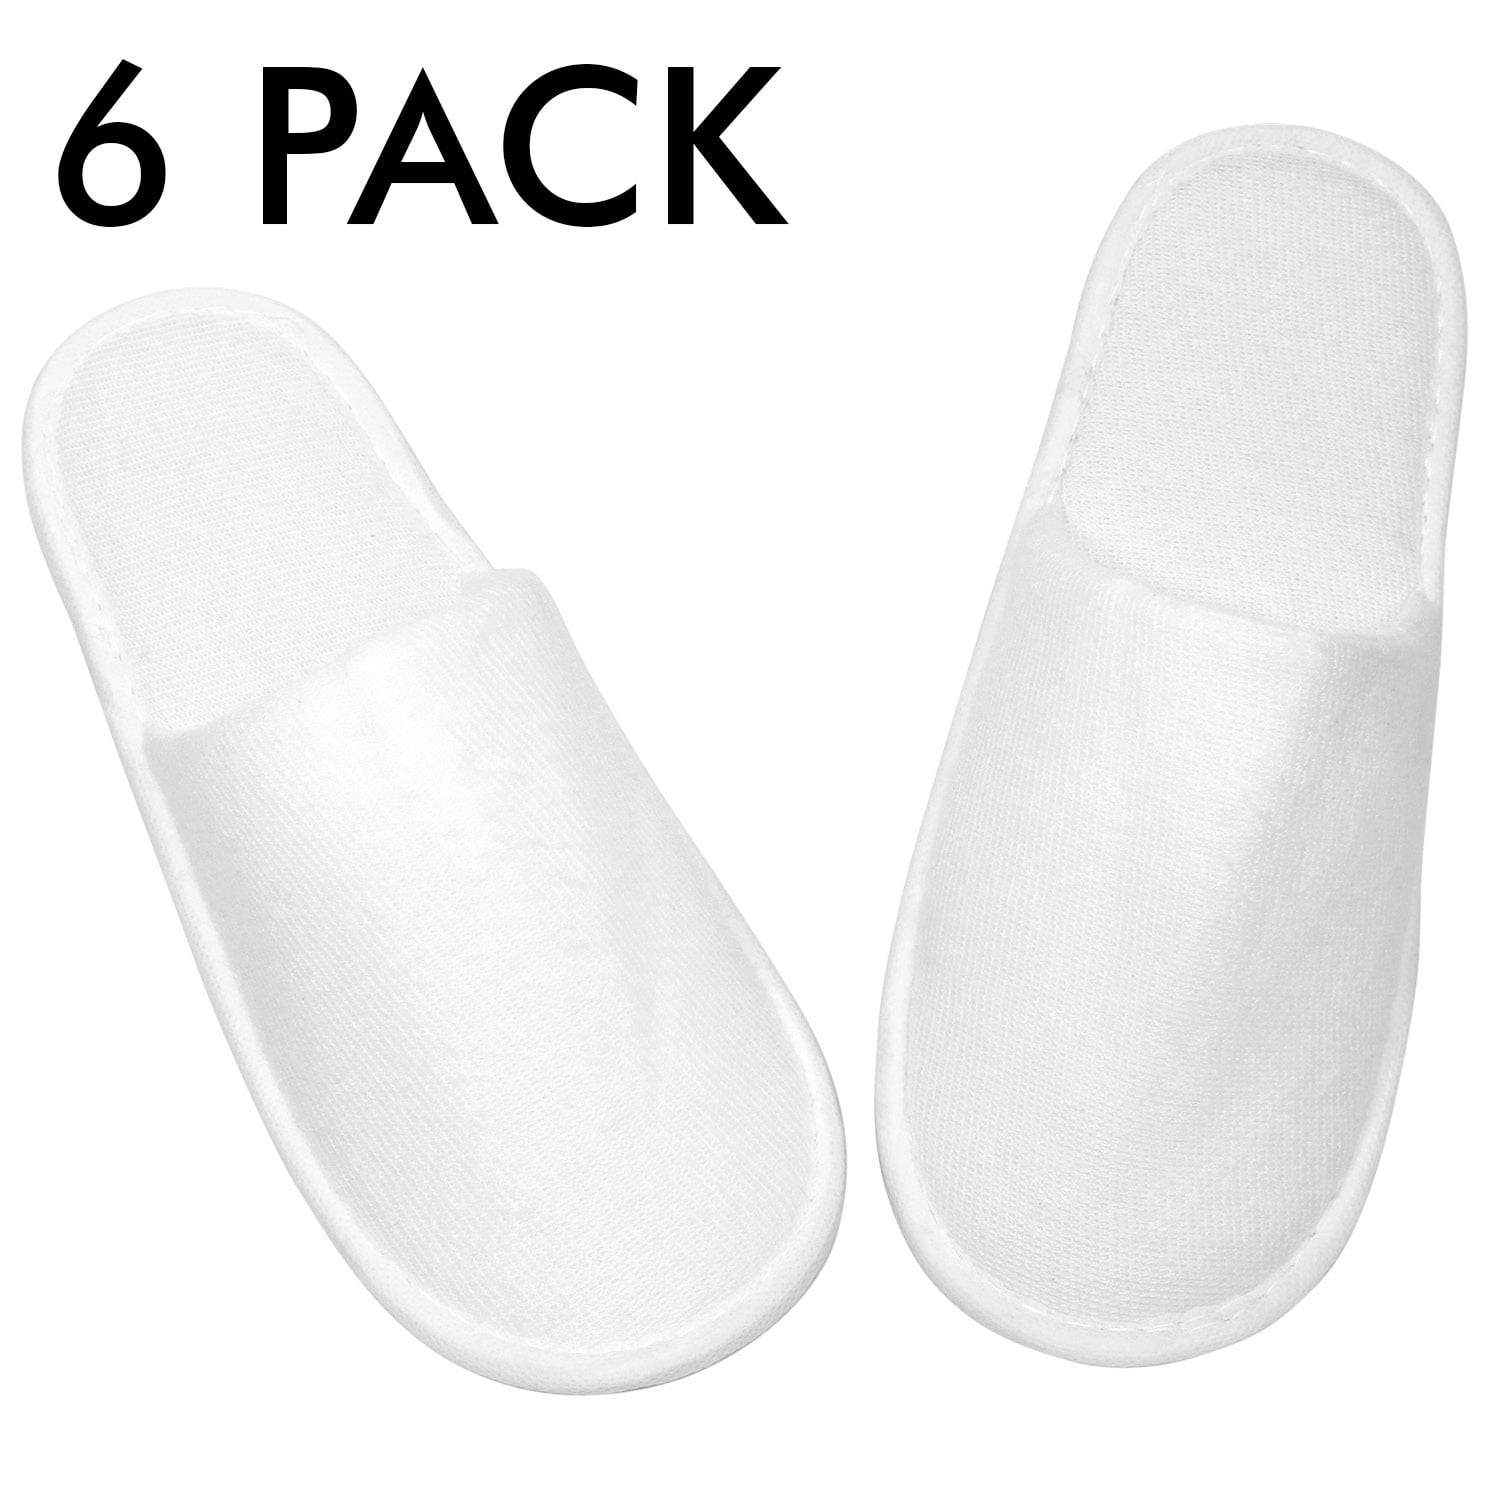 6 Pairs Disposable Spa Slippers Hotel Slippers Open Toe #AS128x6 